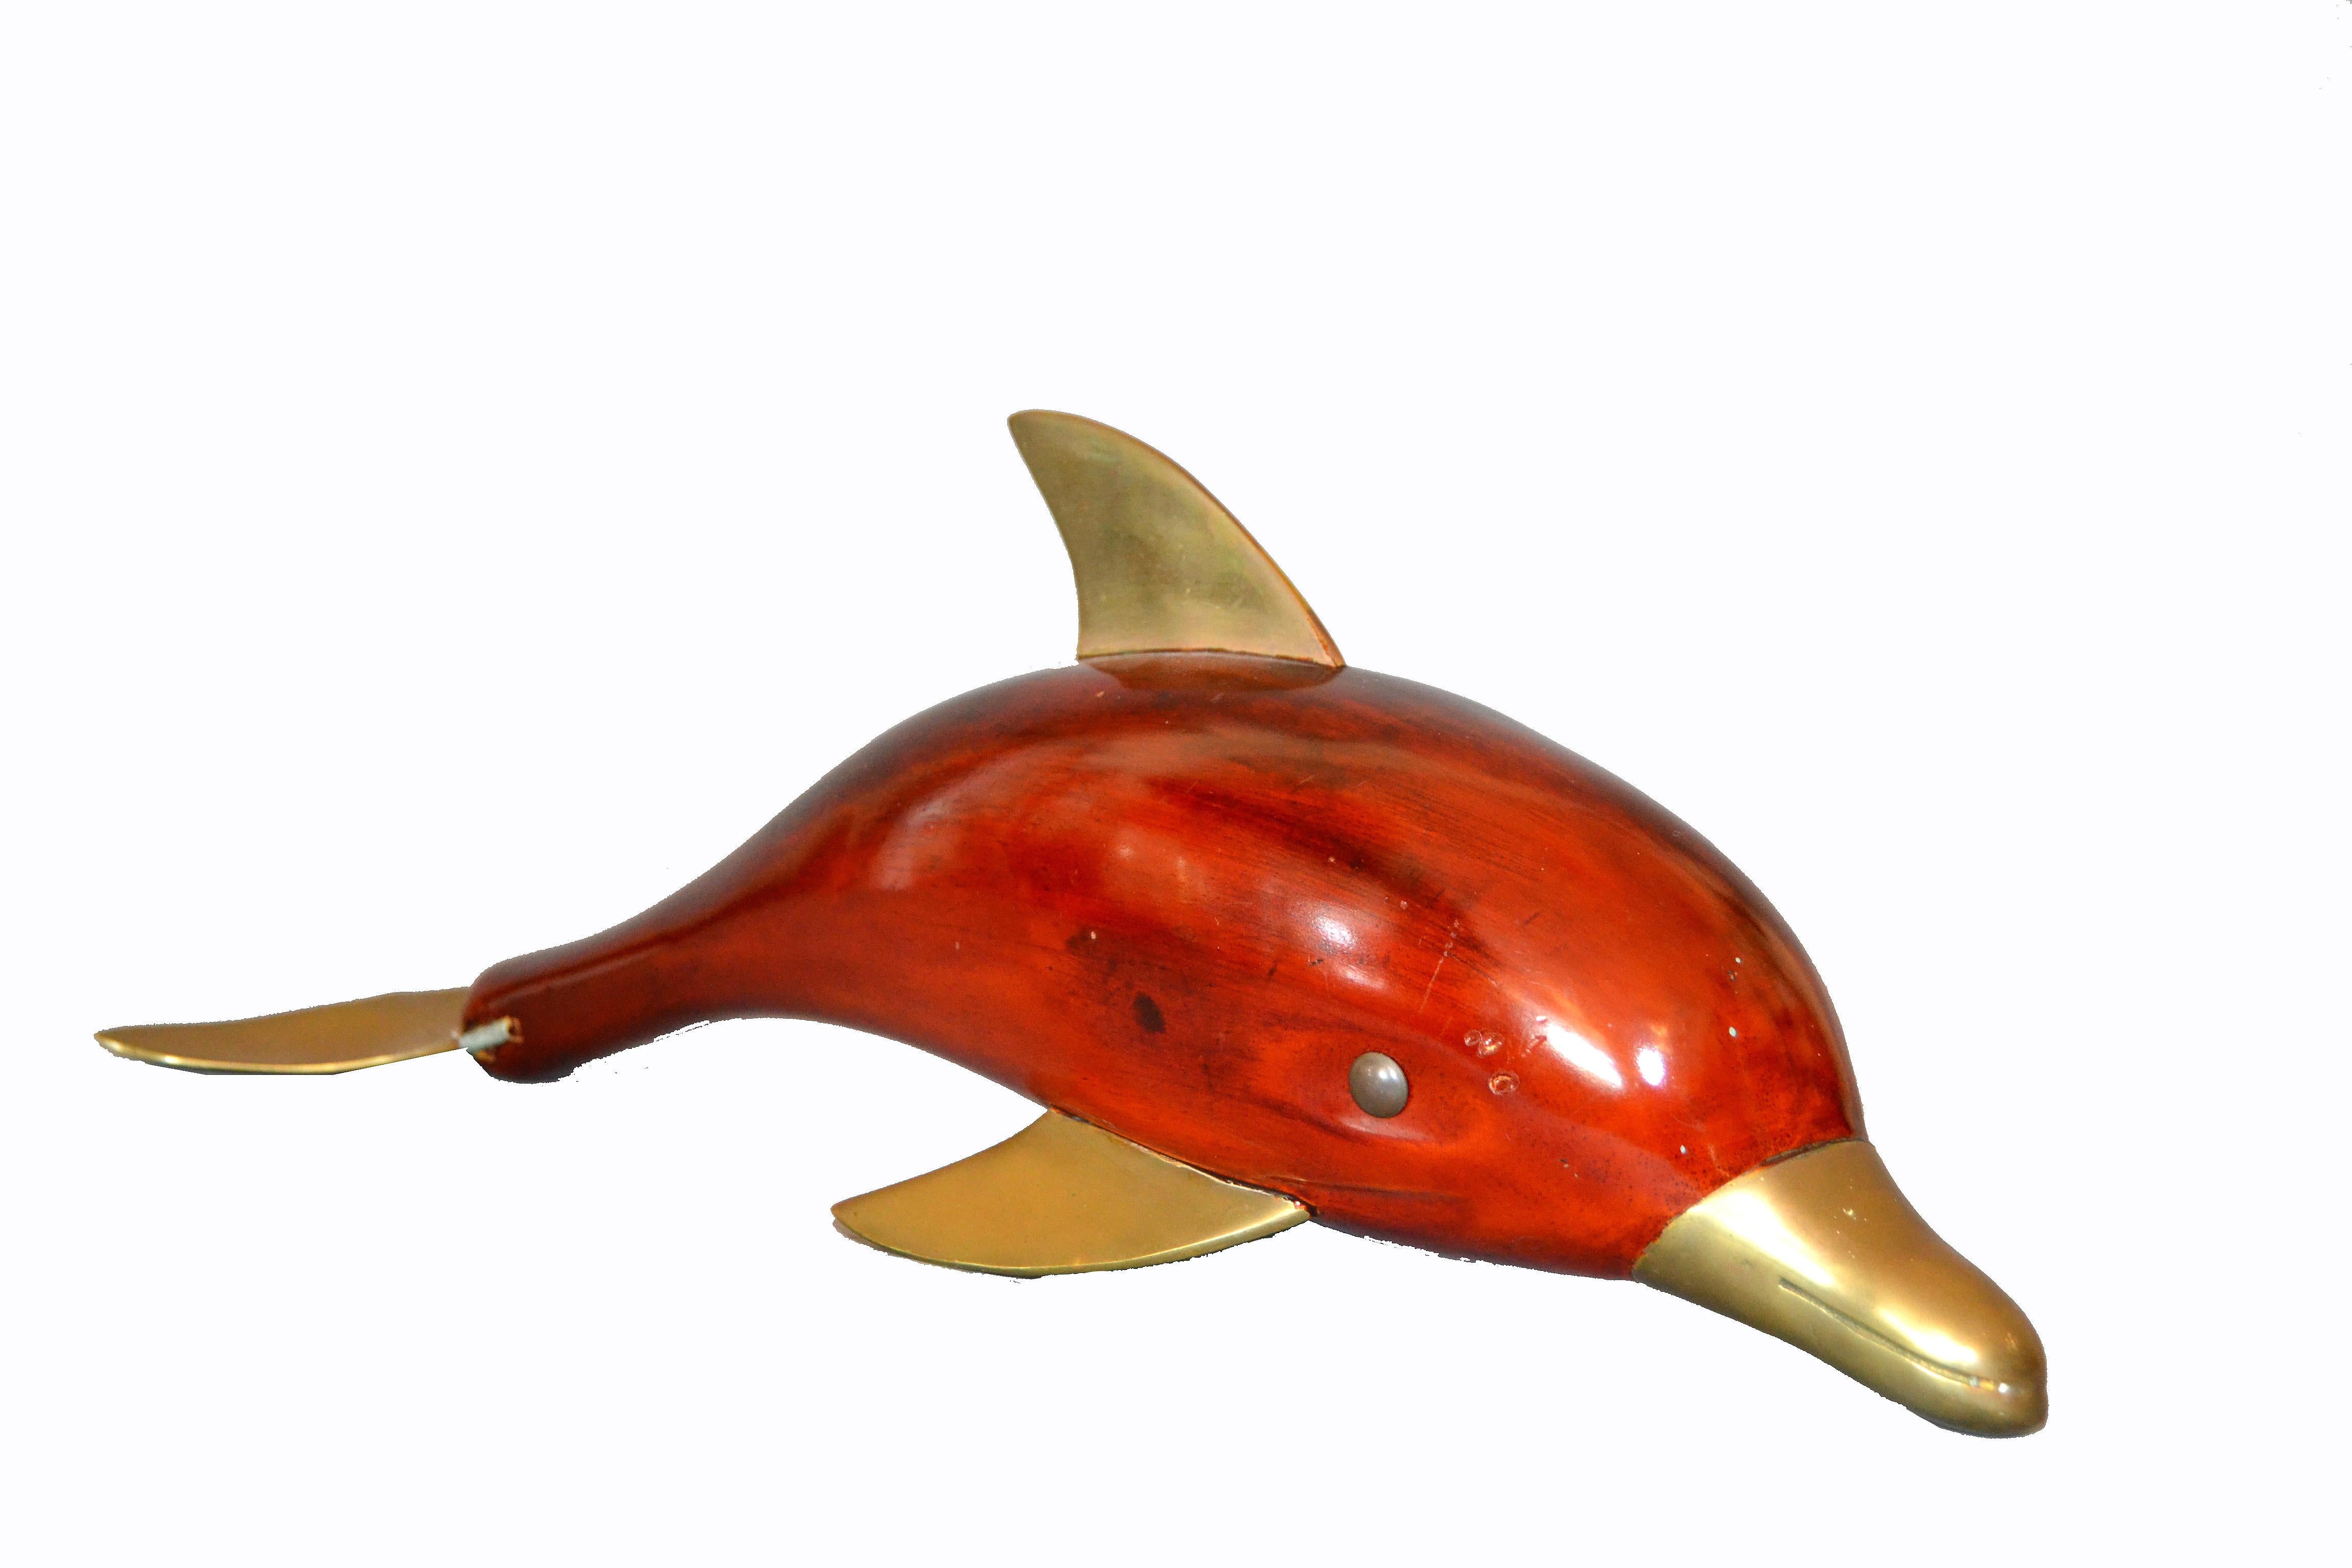 Whimsical Mid-Century Modern brass and rosewood dolphin sculpture.
No Markings.